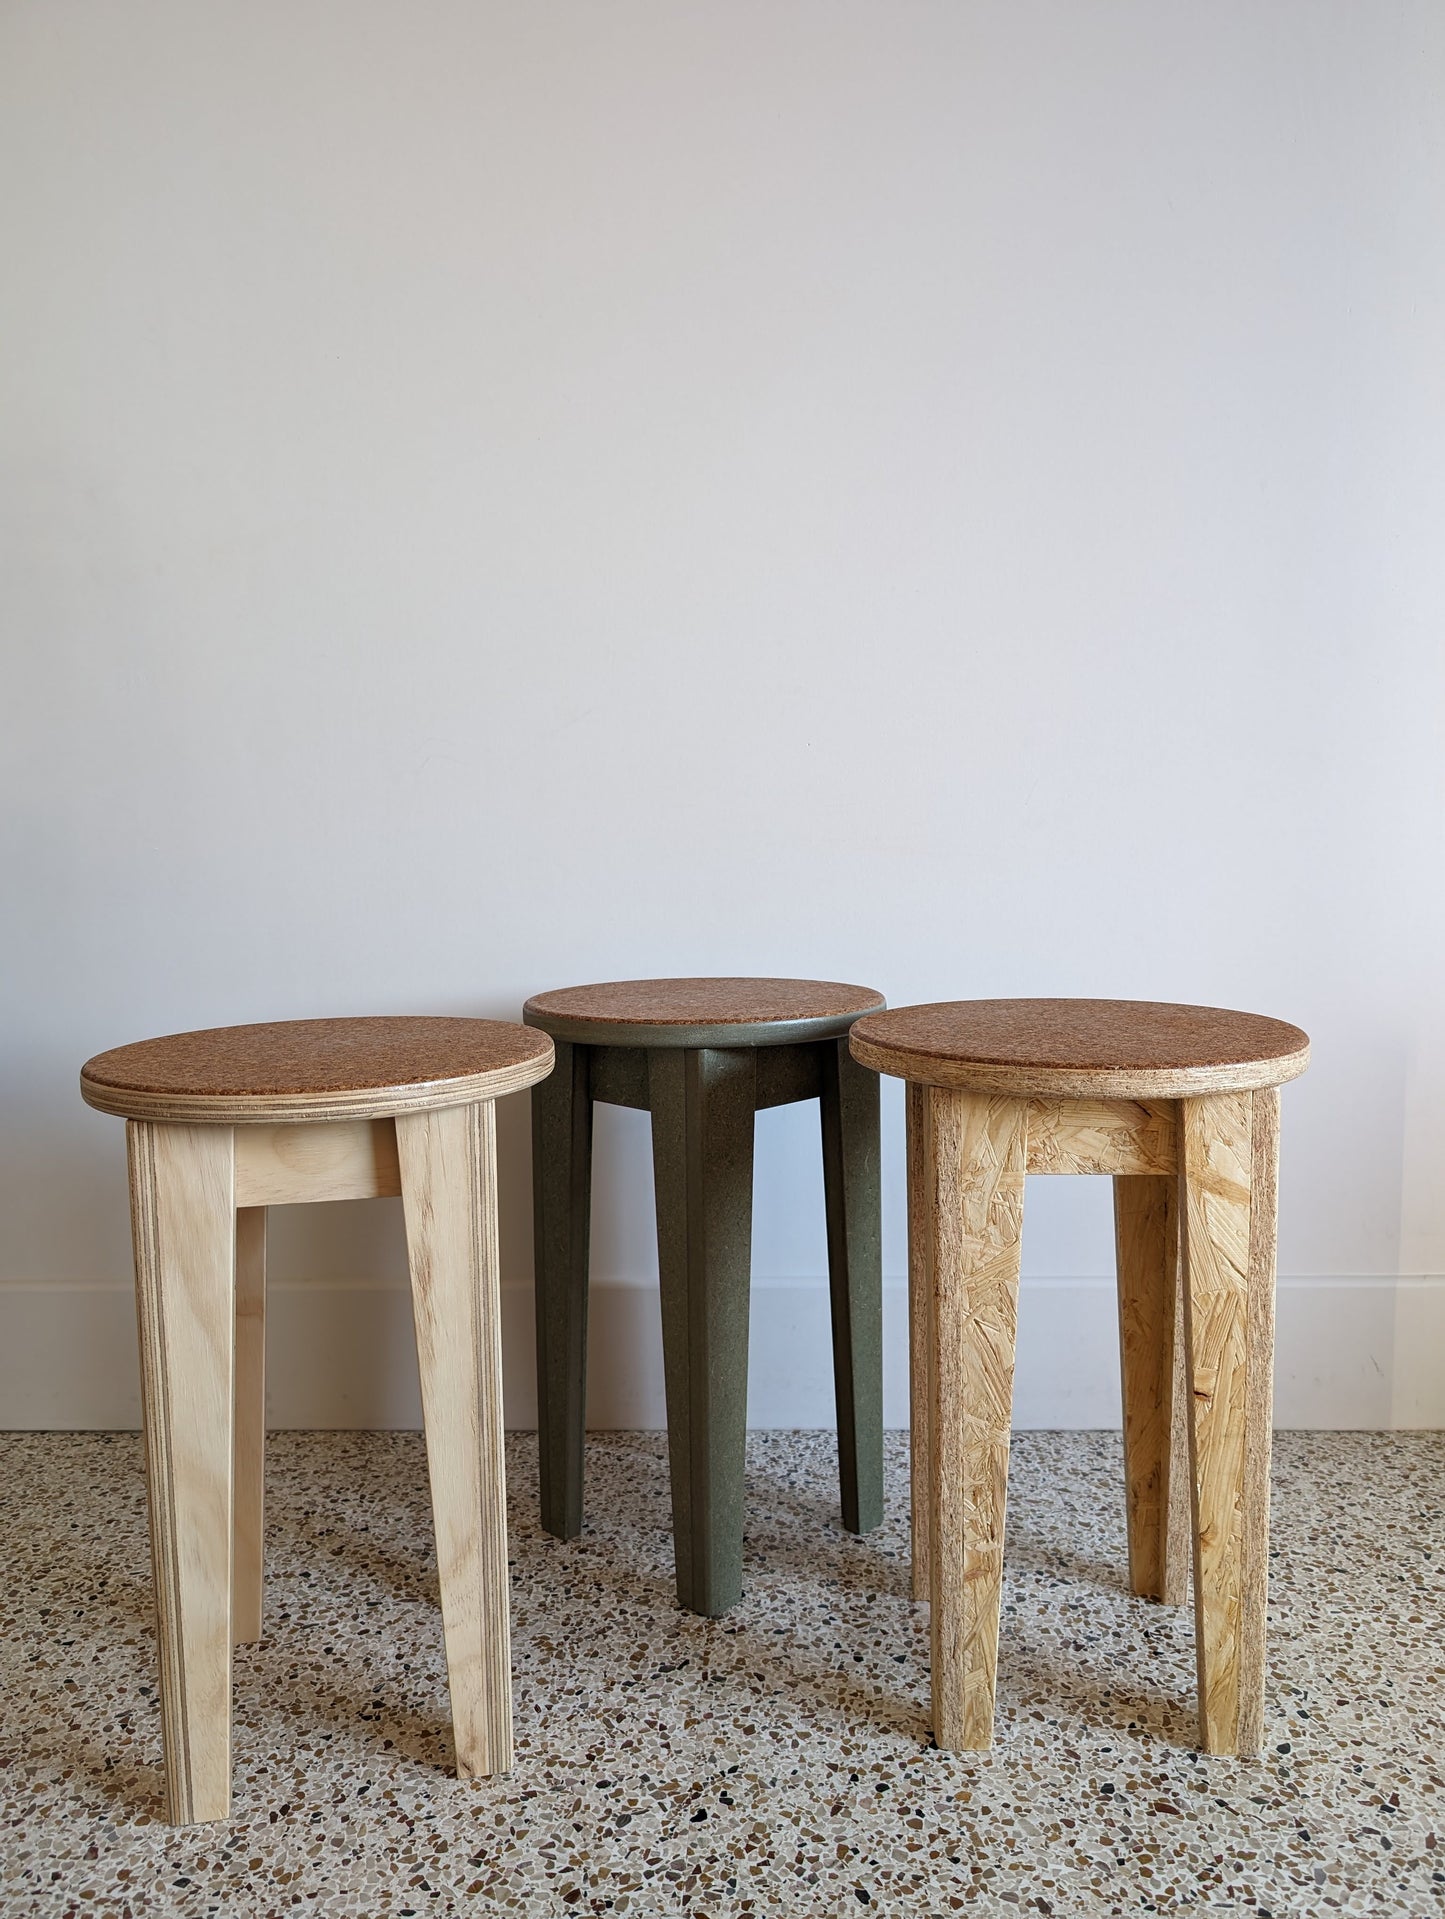 The stool in OSB